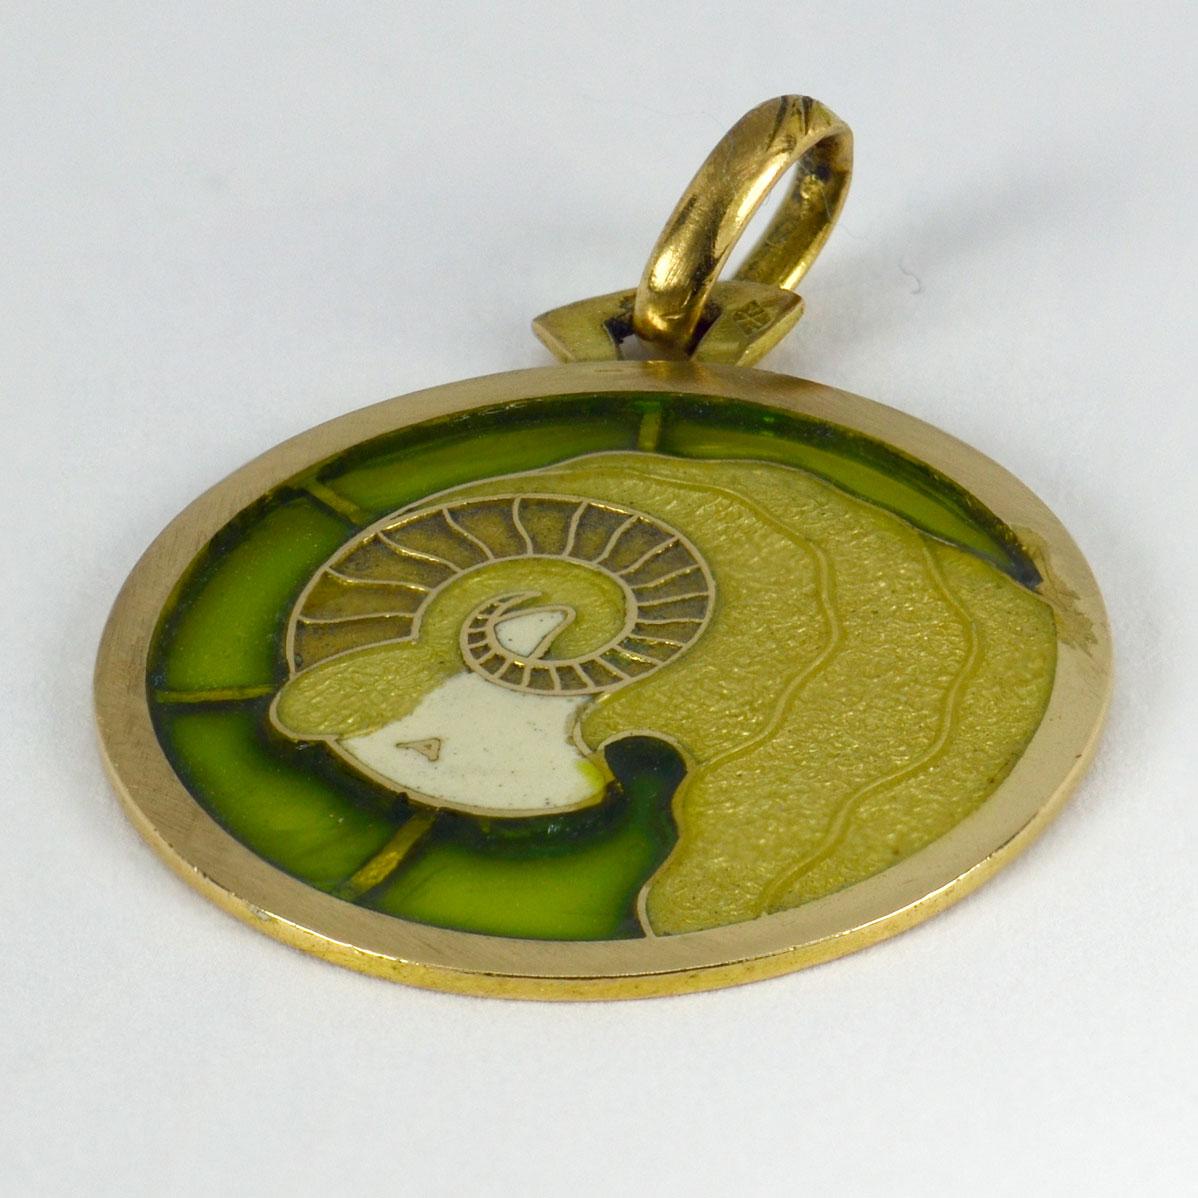 A French 18 karat (18K) yellow gold charm pendant designed as a stylised profile of the Zodiac sign Ares with green and white plique a jour enamel (restored). Stamped with the eagle’s head punch mark for 18 karat gold and French manufacture with